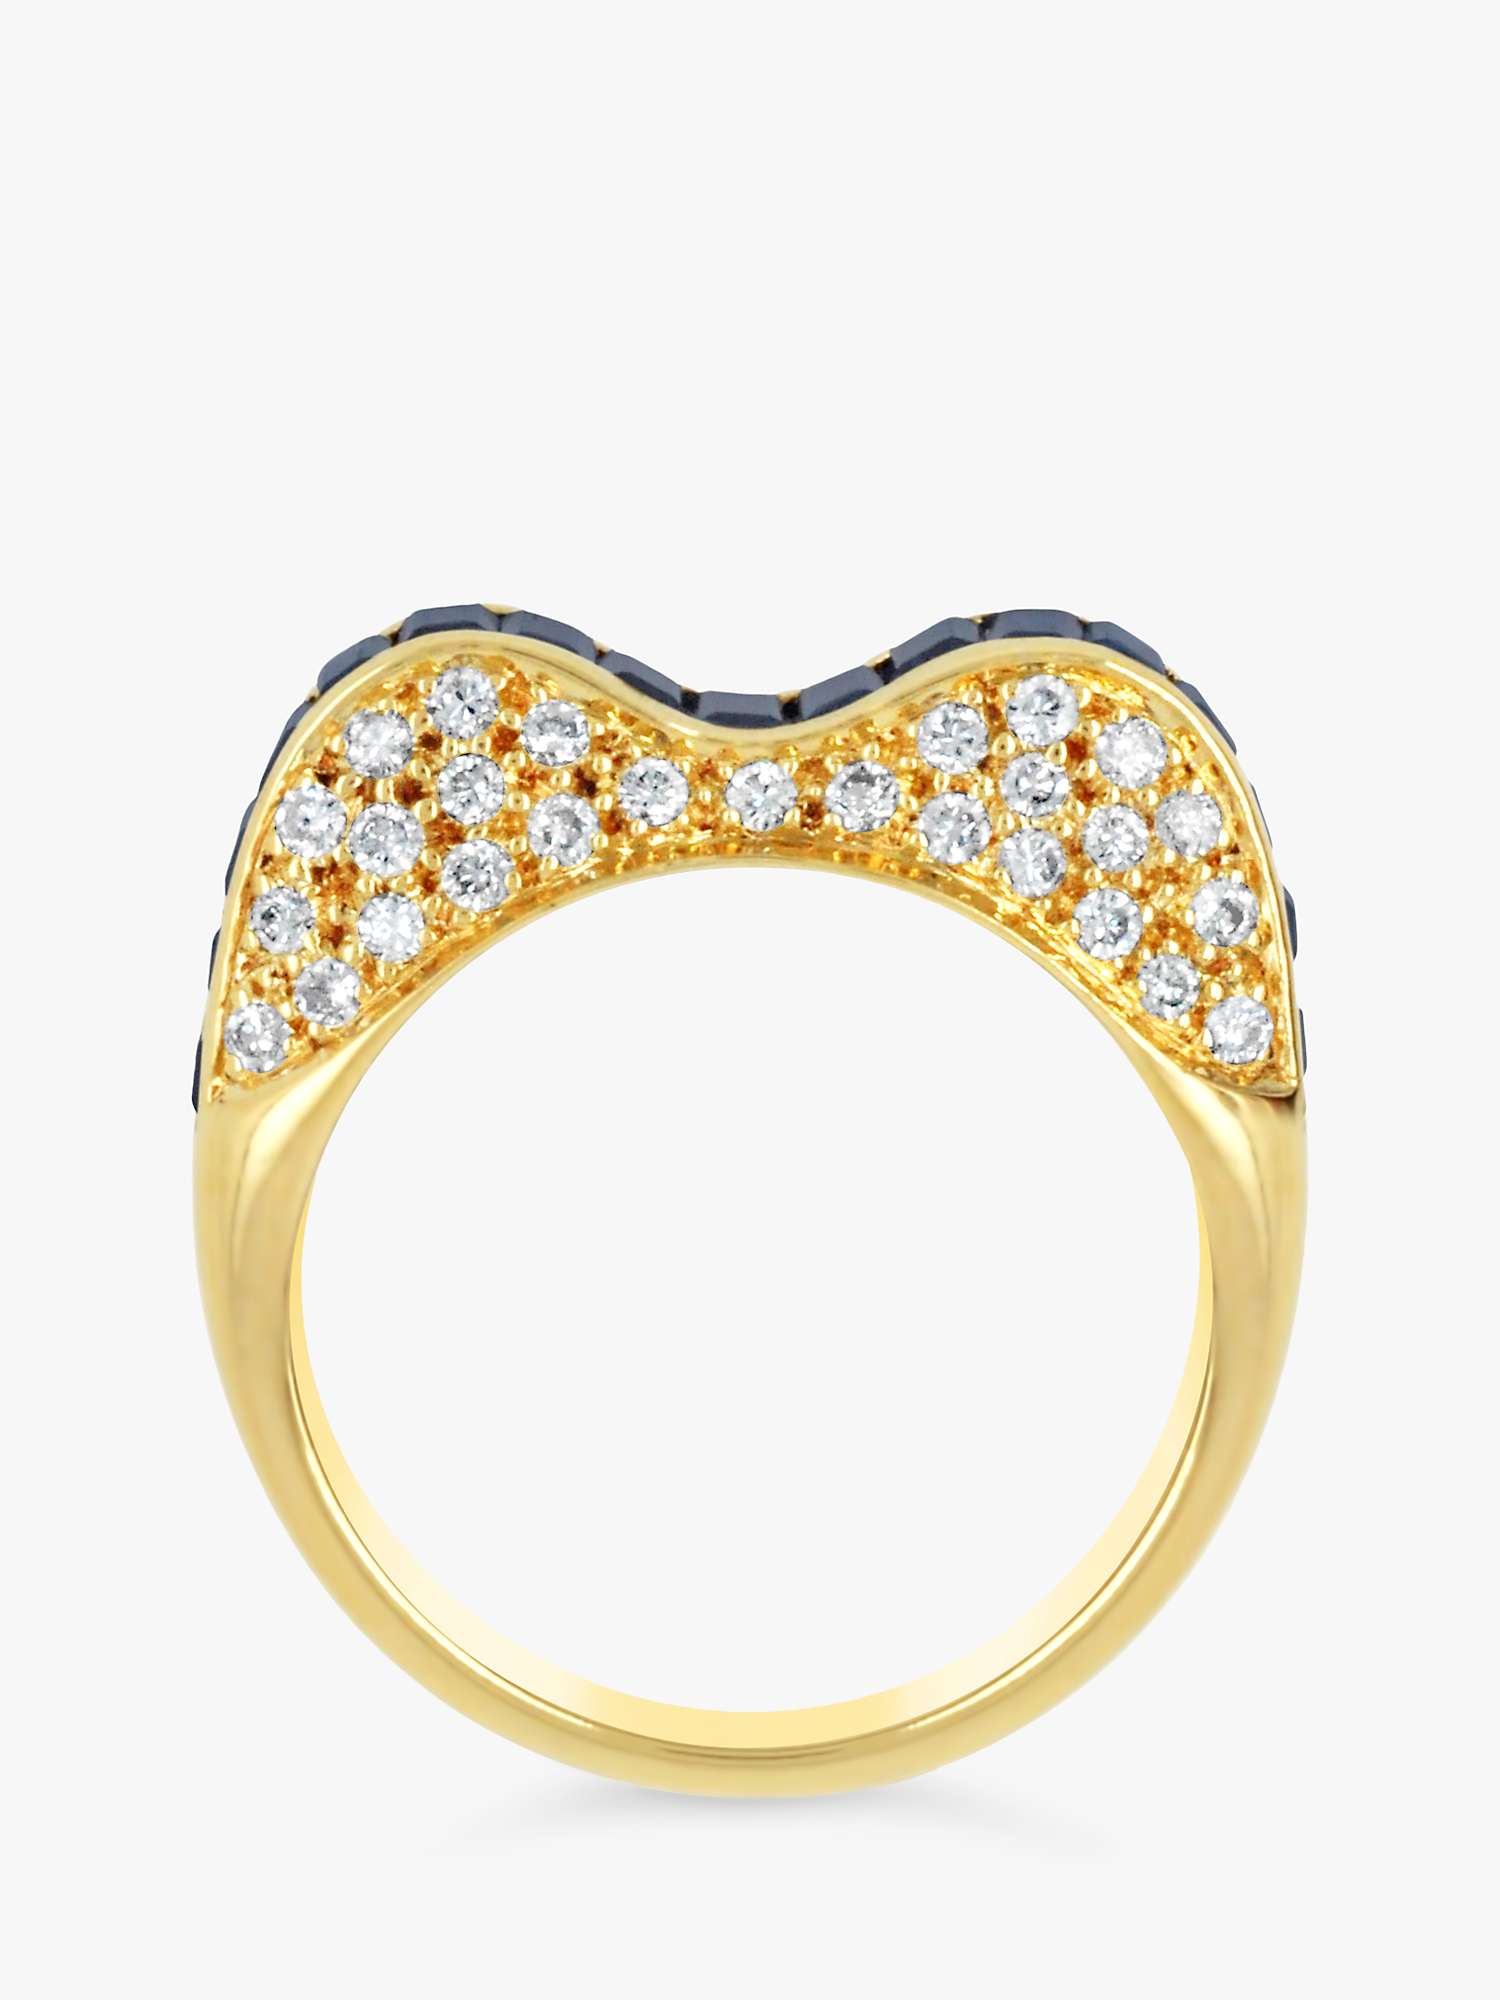 Buy Milton & Humble Jewellery Second Hand 18ct Yellow Gold Undulating Sapphire & Diamond Cocktail Ring Online at johnlewis.com